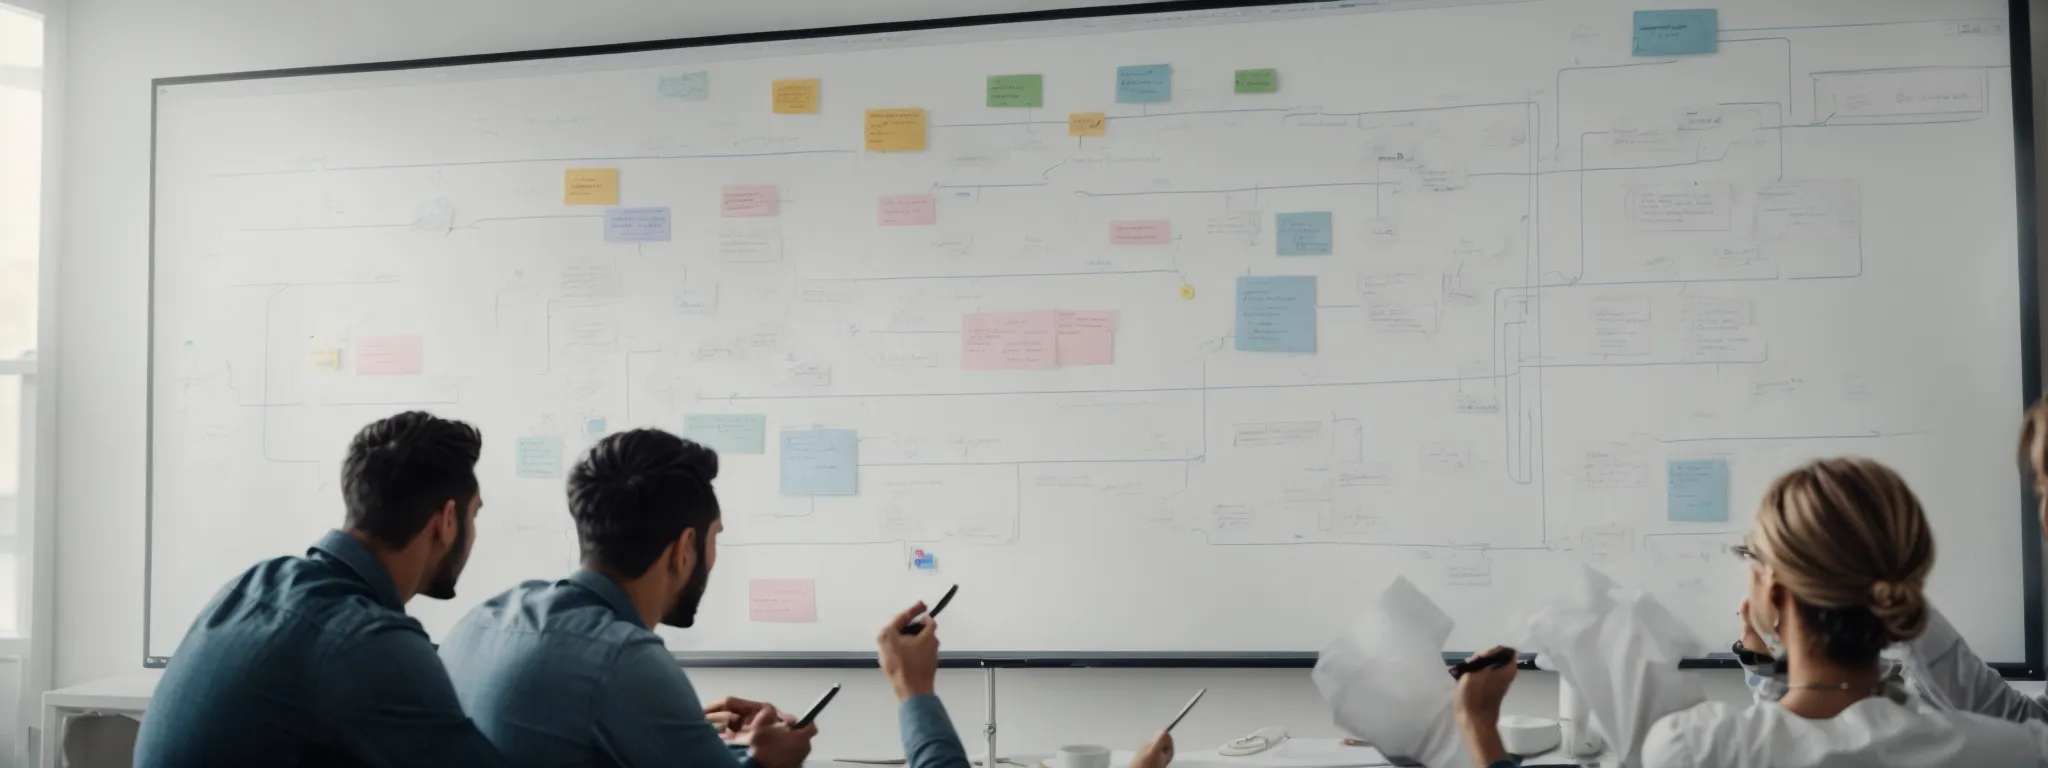 a group of marketers engaged in a brainstorming session with diagrams and social media icons on a whiteboard.